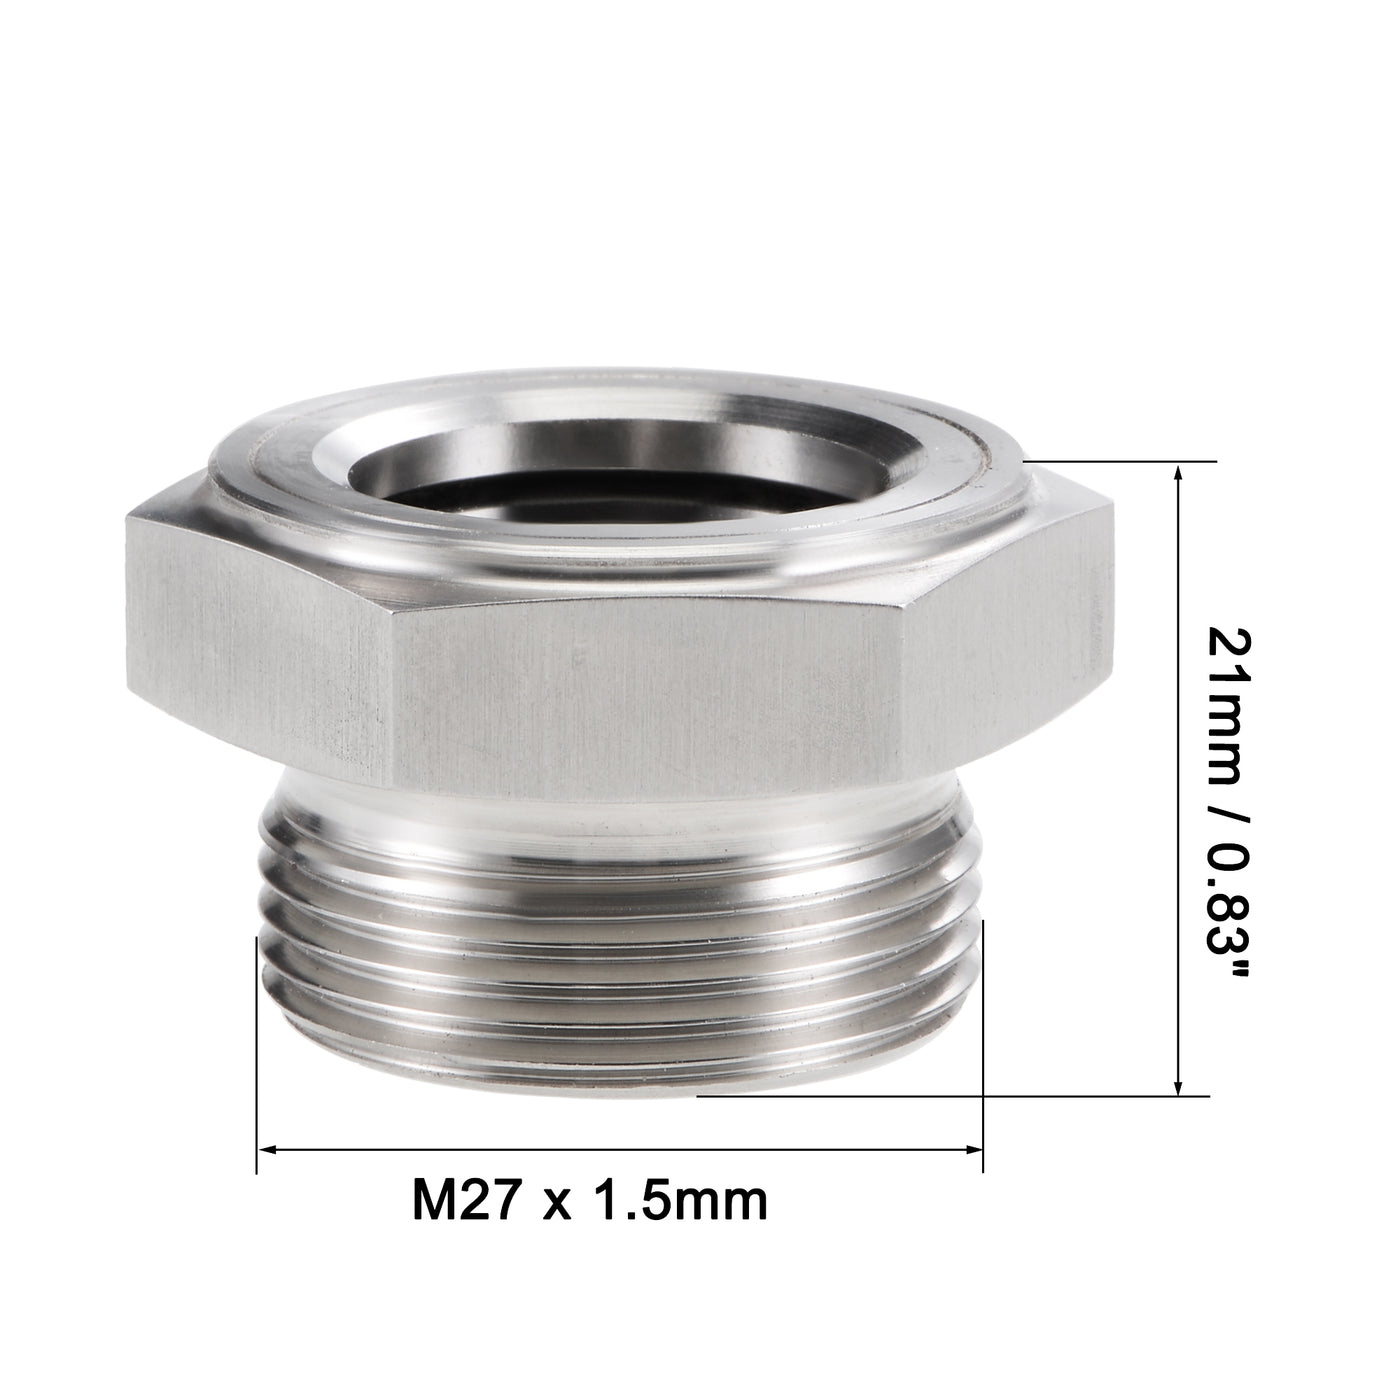 Uxcell Uxcell Oil Liquid Level Gauge Sight Glass M18x1.5mm Male Threaded 304 Stainless Steel Air Compressor Fittings with Gasket, Silver Tone